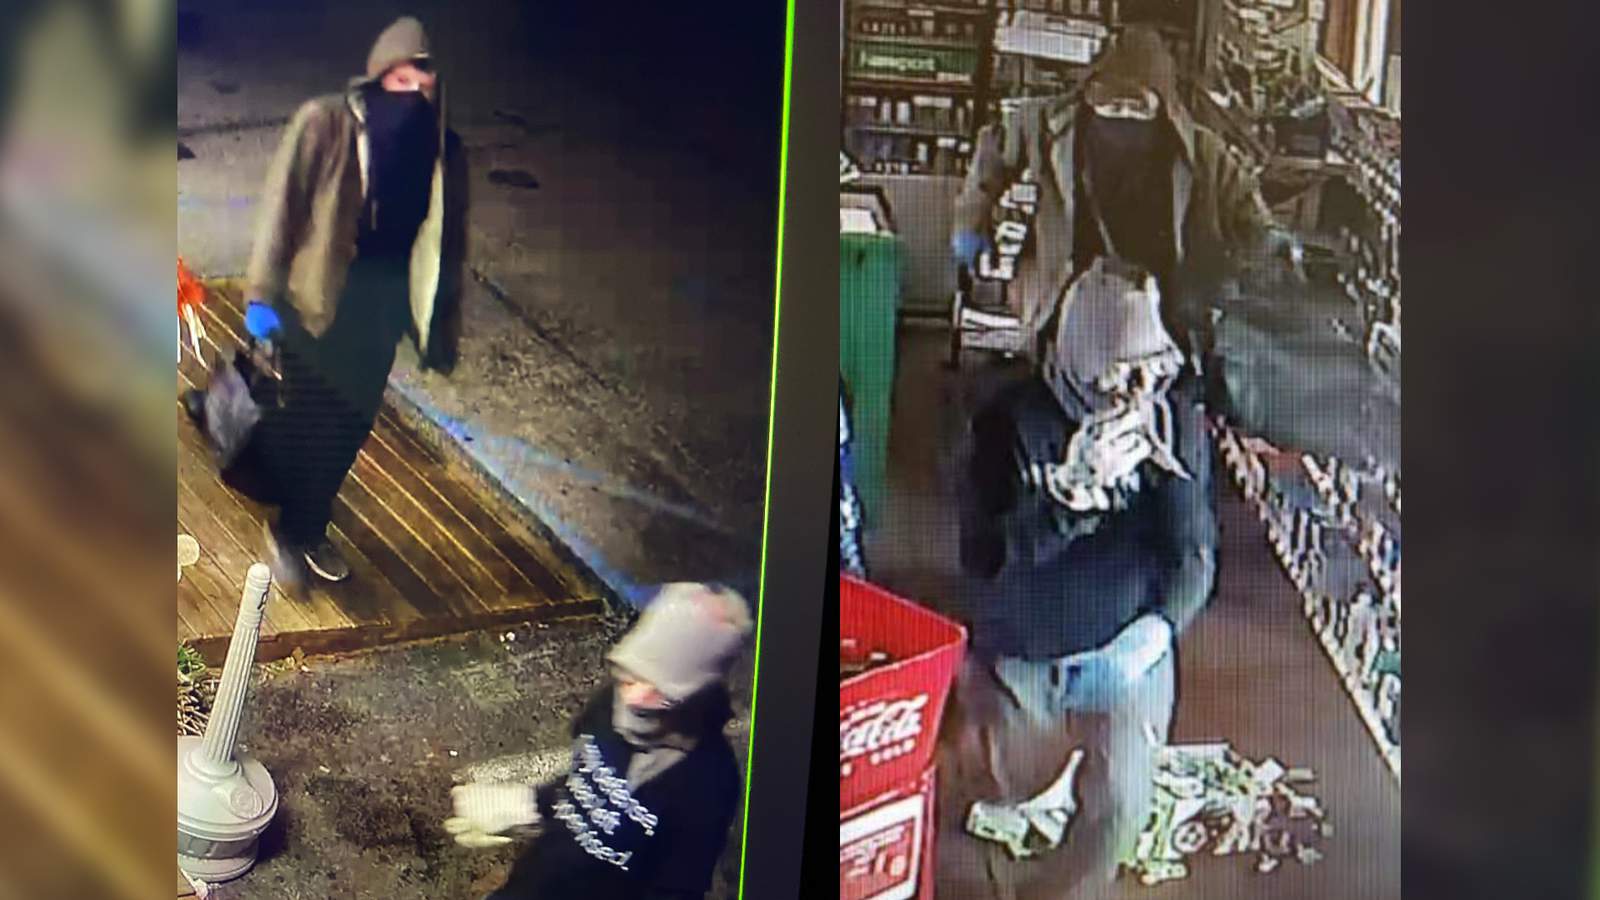 Authorities searching for burglars who grabbed cash, cigarettes from Franklin County stores